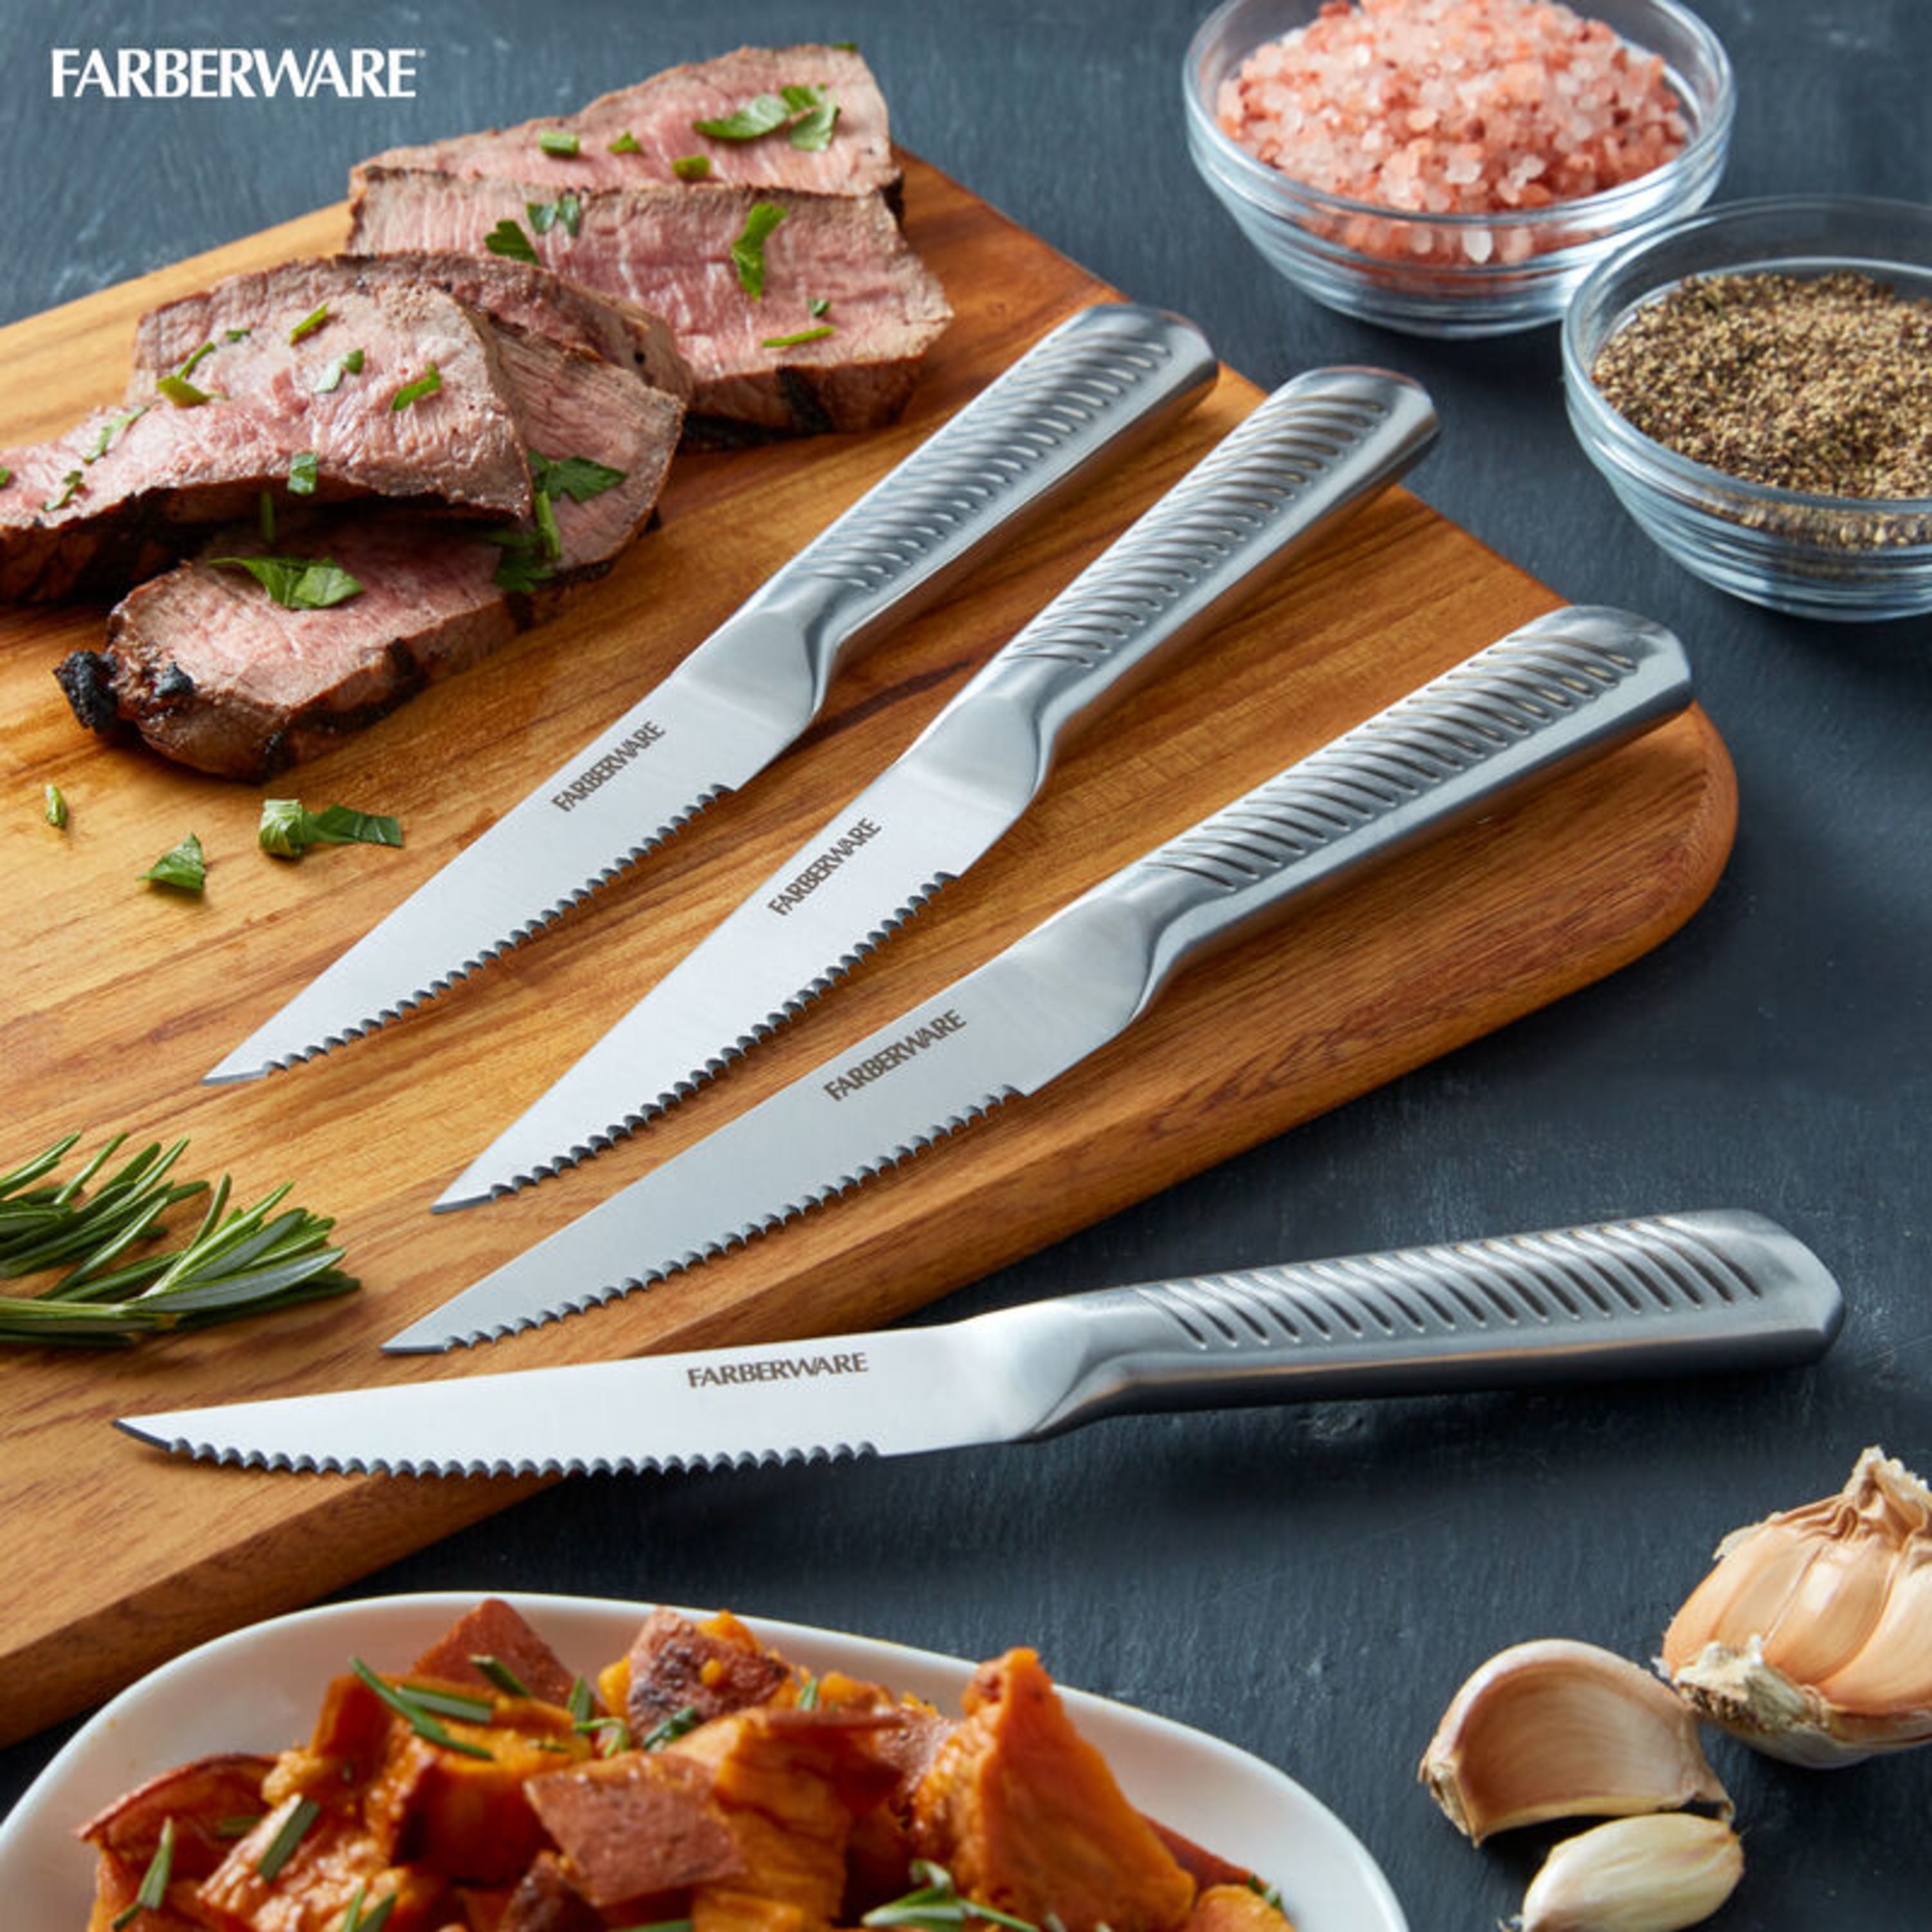 Farberware Professional 4-piece Forged Textured Stainless Steel